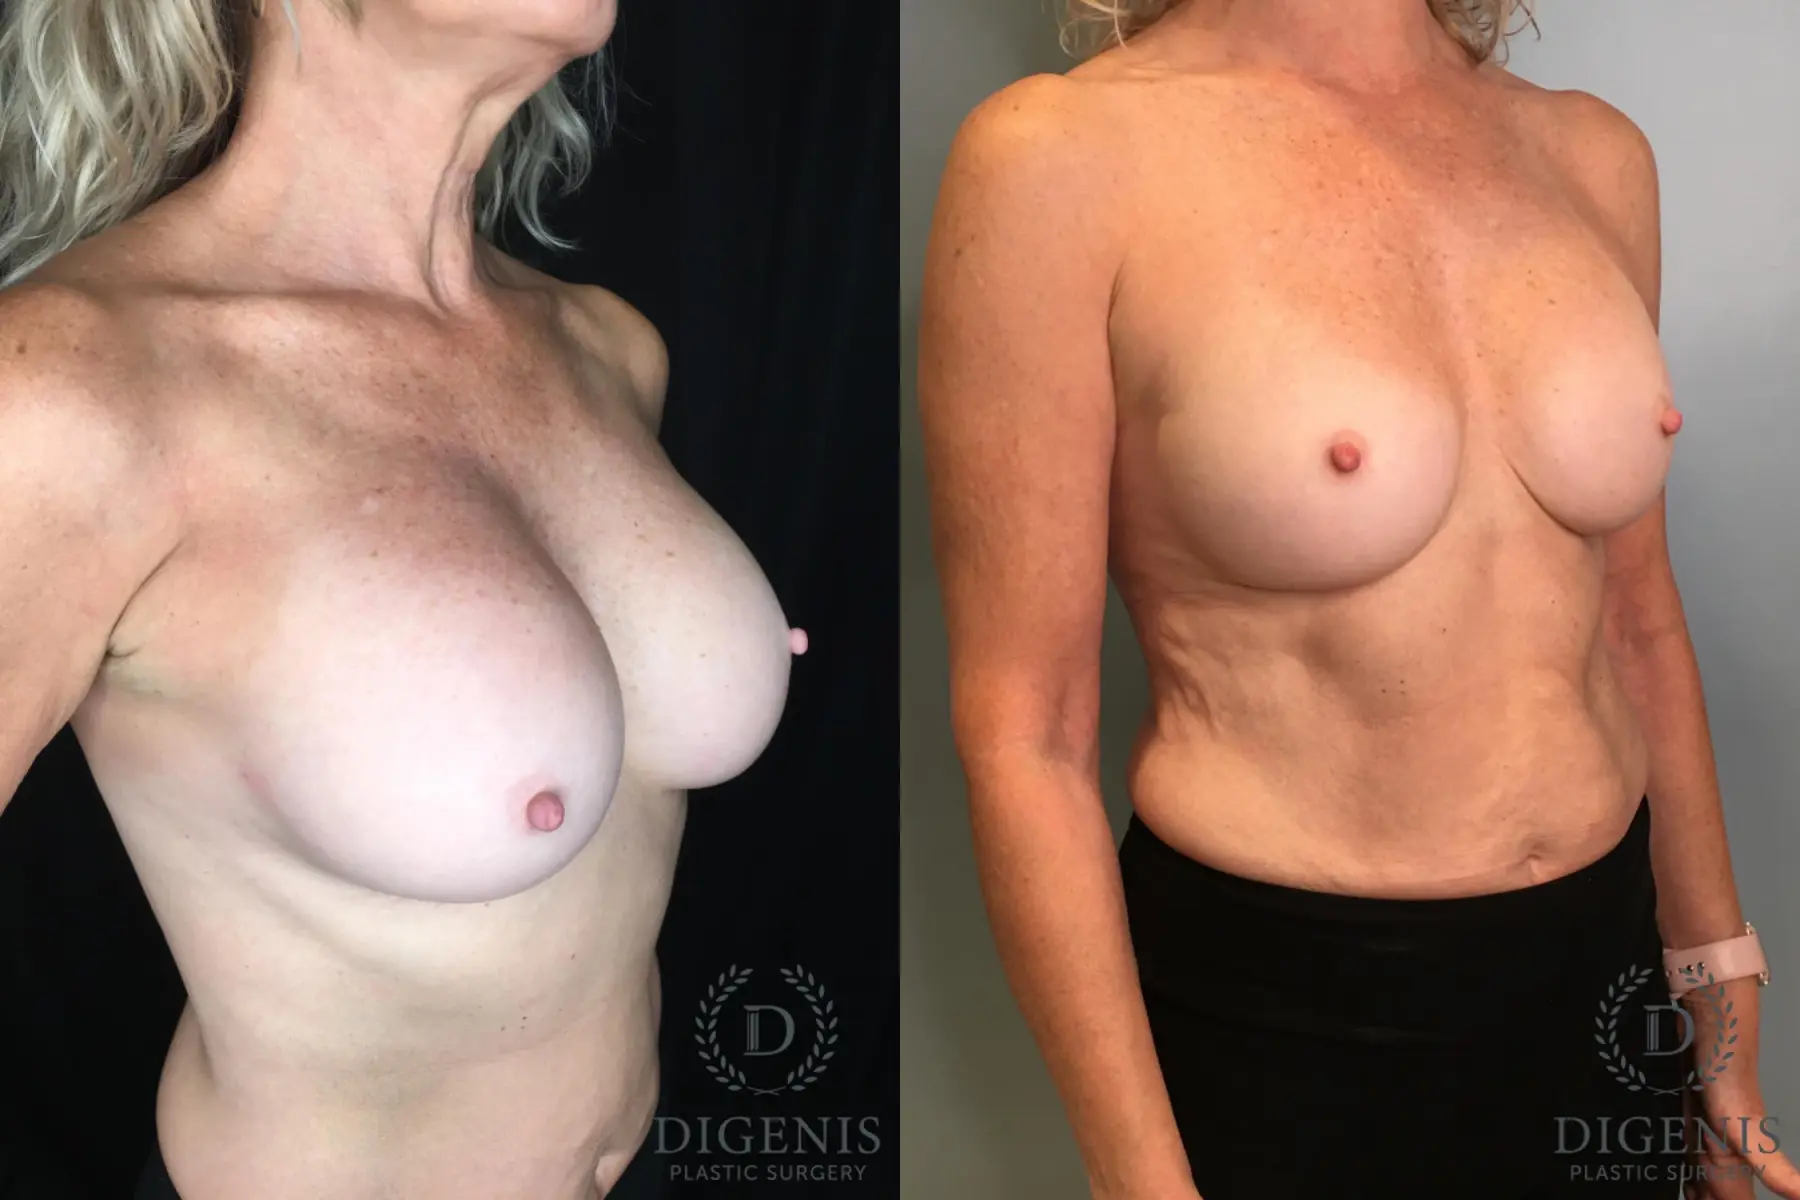 Breast Implant Exchange: Patient 4 - Before and After 2